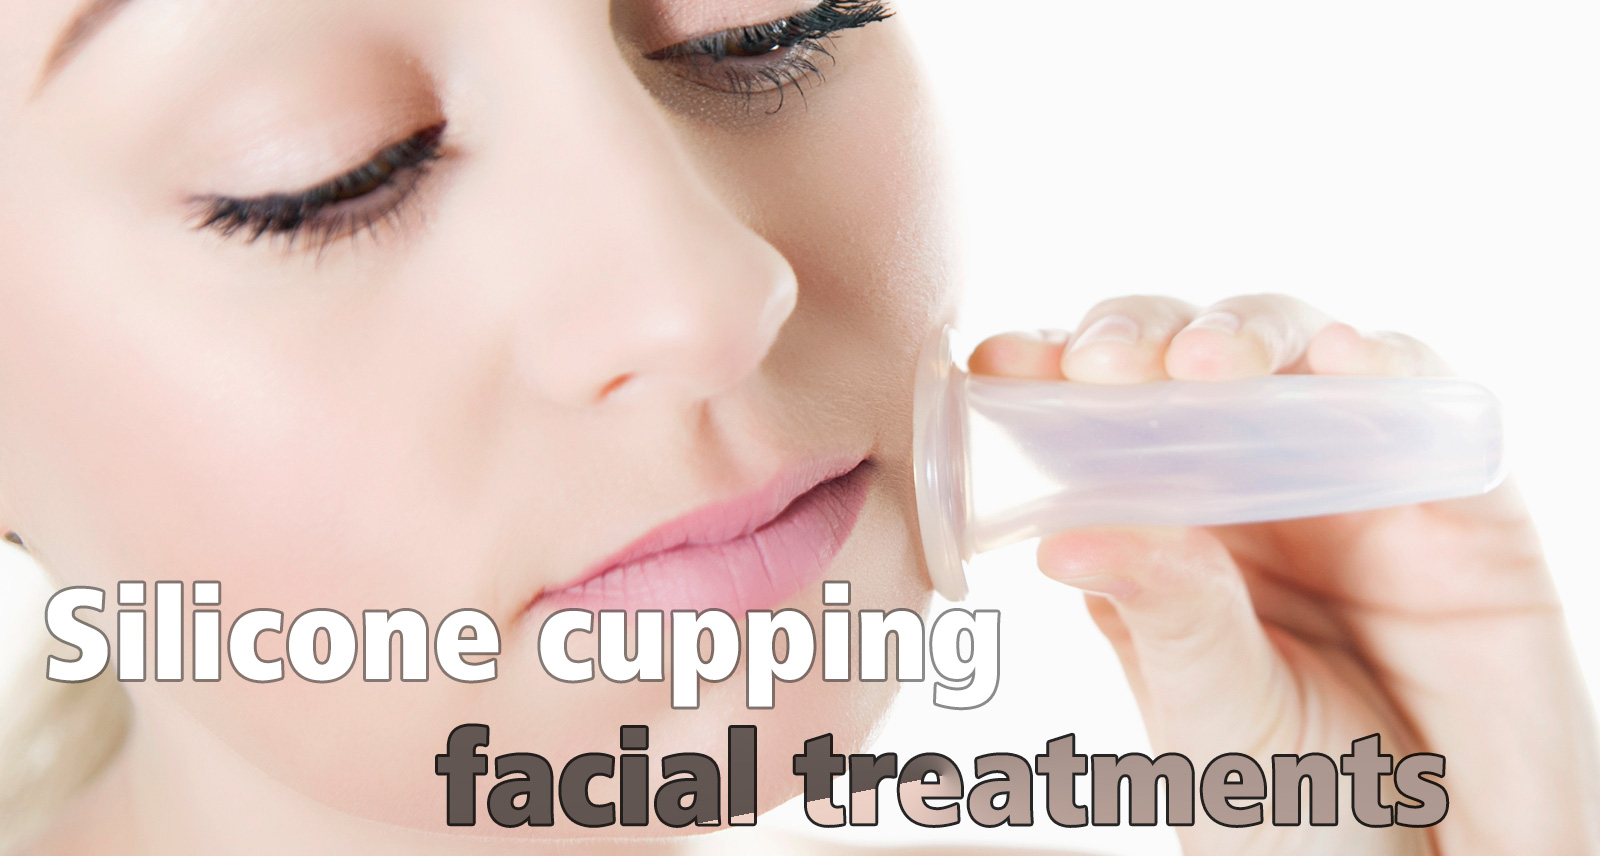 lierre-cupping-sets-silicone-cups-how-do-silicone-cupping-facial-treatments-work